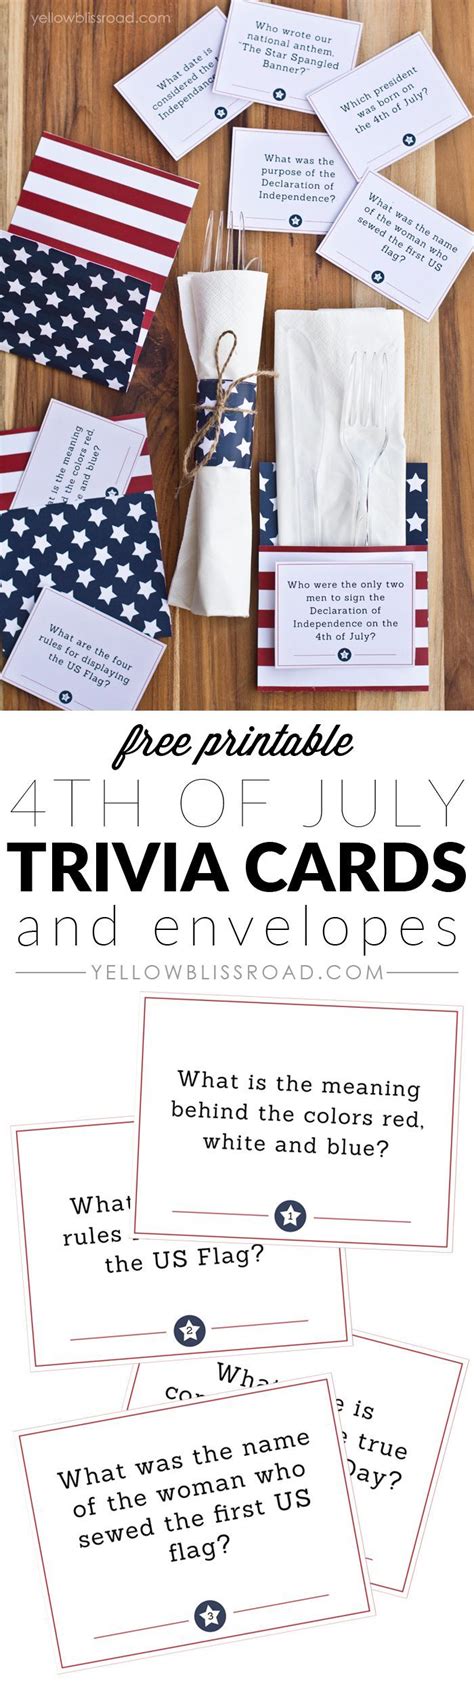 You can use fun questions about the 4th of july as a quiz for people learning about holidays or american history. Free Printable 4th of July Trivia Cards & Utensil Holders | Trivia, Utensils and Free printable